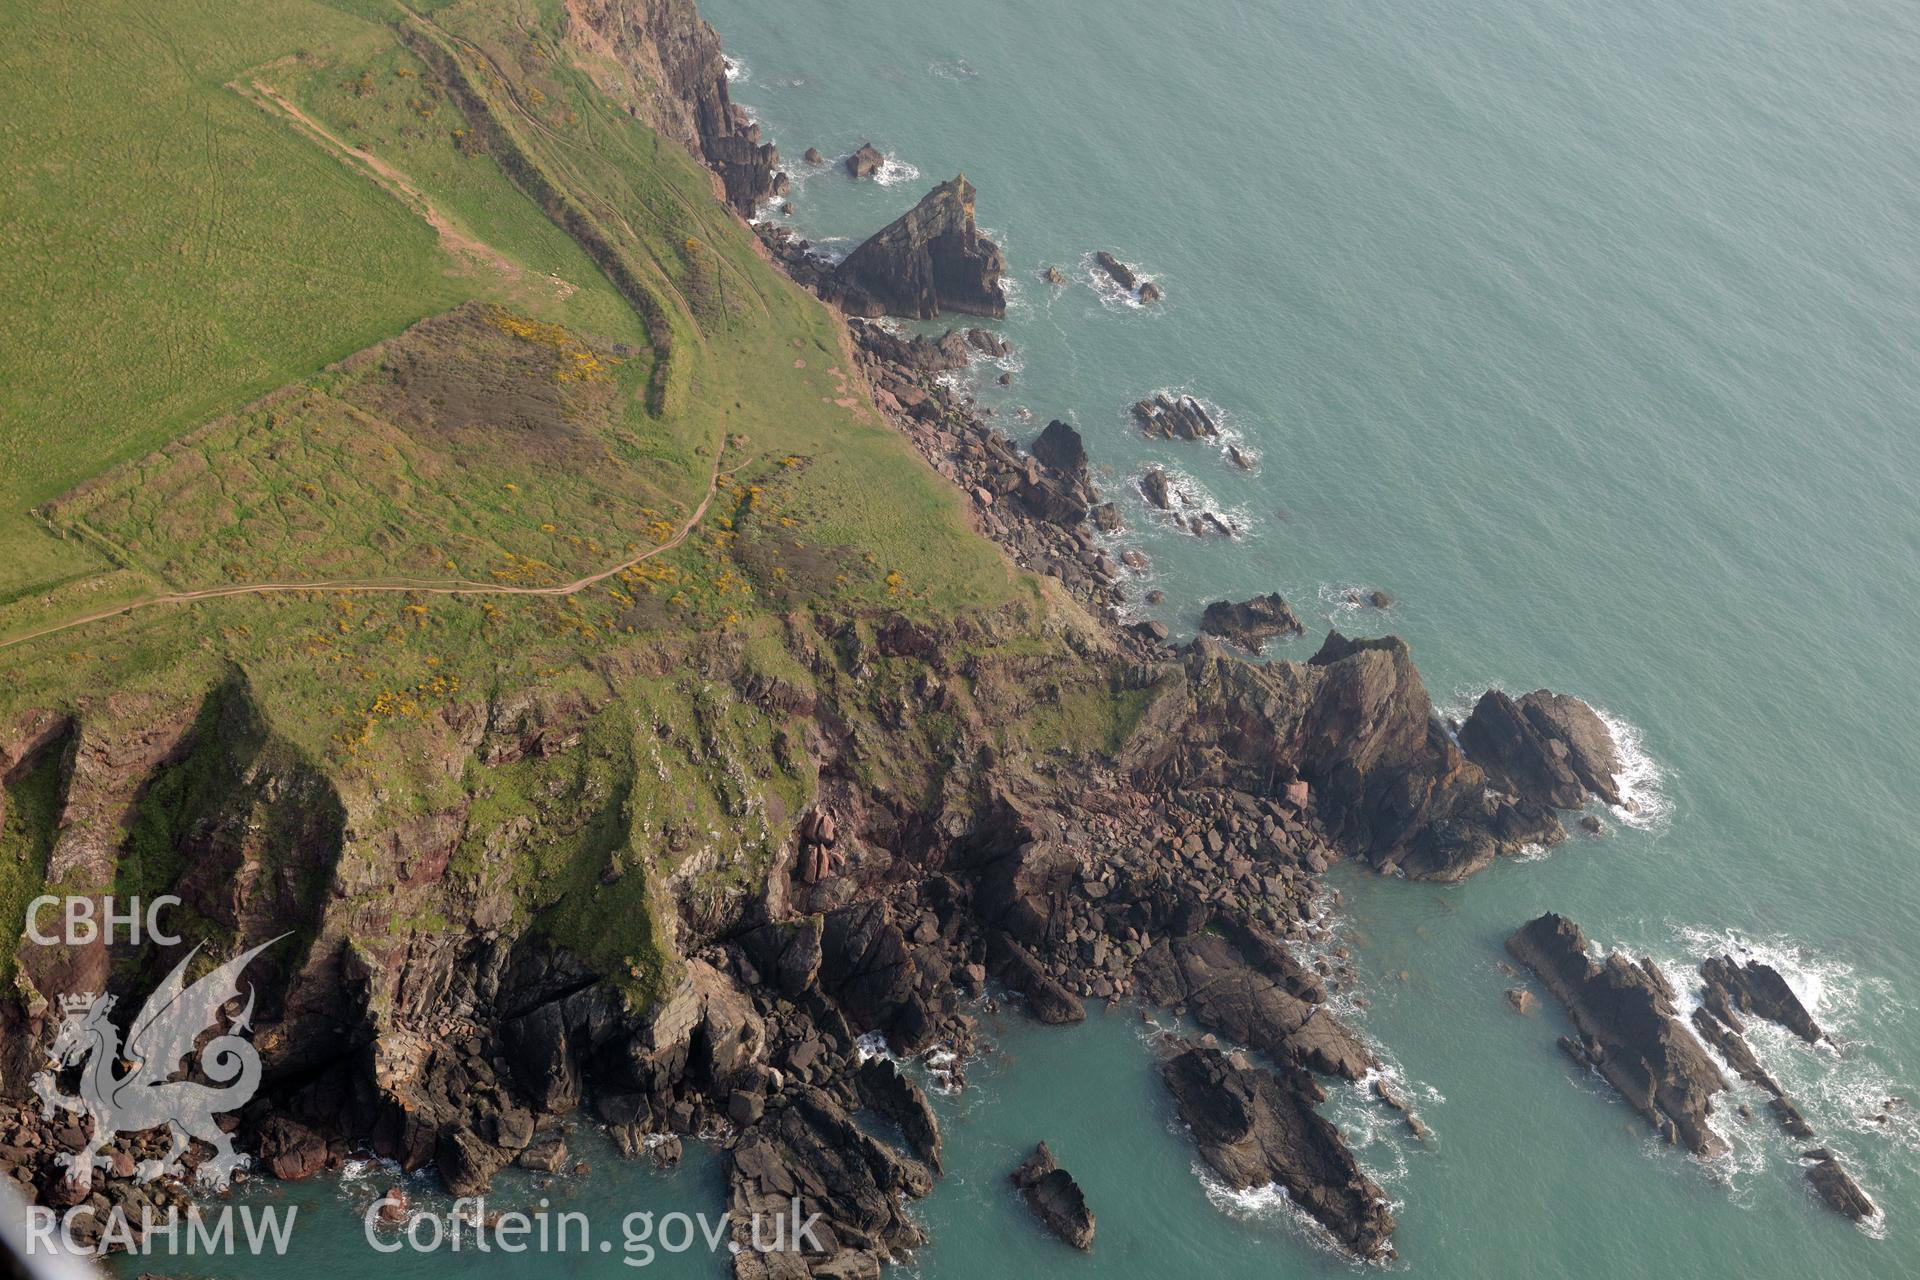 Aerial photography of Little Castle Point taken on 27th March 2017. Baseline aerial reconnaissance survey for the CHERISH Project. ? Crown: CHERISH PROJECT 2017. Produced with EU funds through the Ireland Wales Co-operation Programme 2014-2020. All material made freely available through the Open Government Licence.